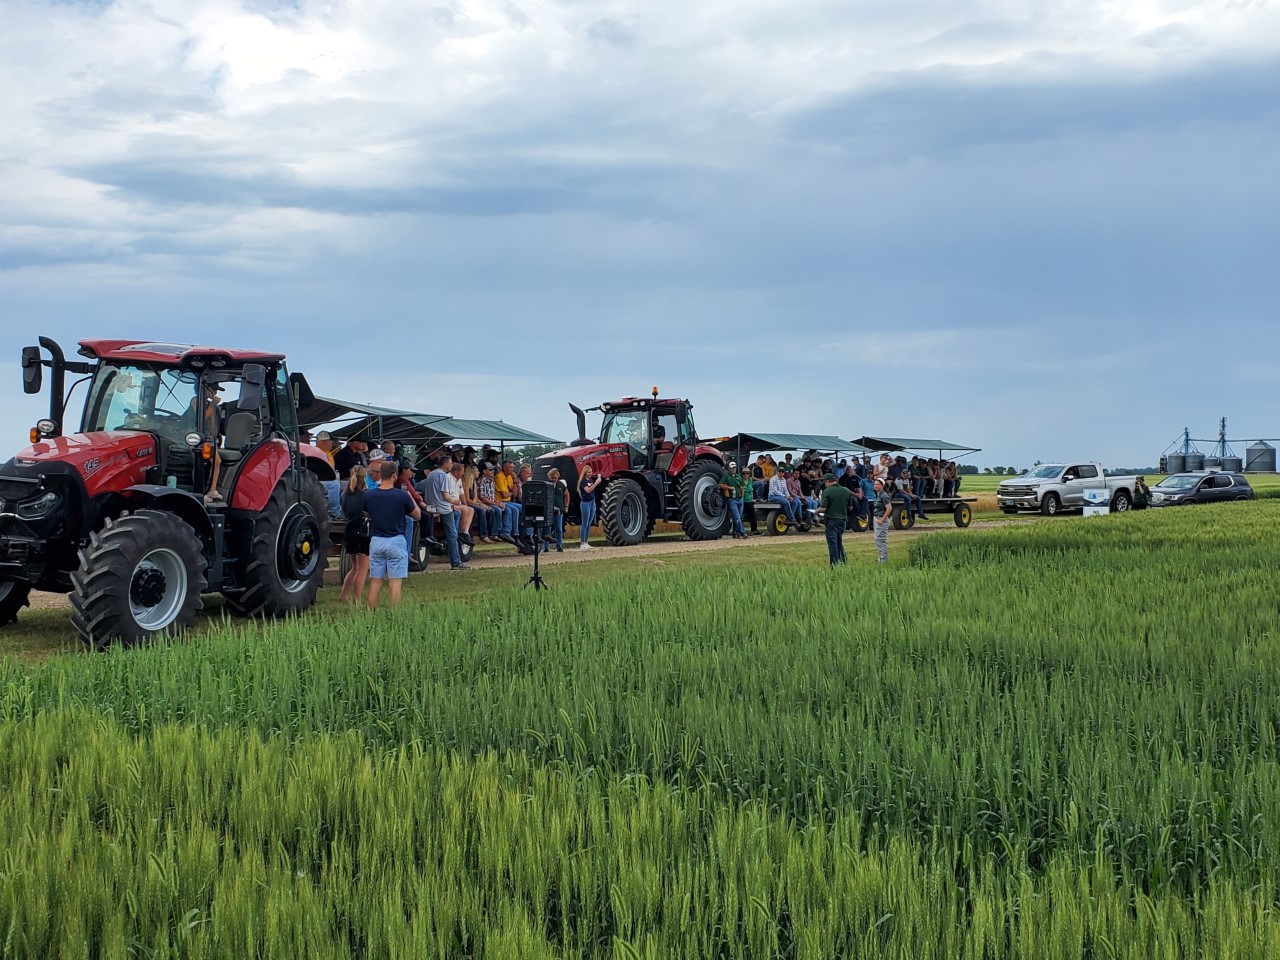 Wheat, soybeans, crop diseases and pests, and weed management are among the topics for the annual field tour set for July 17 at the NDSU Agronomy Seed Farm. (NDSU photo)